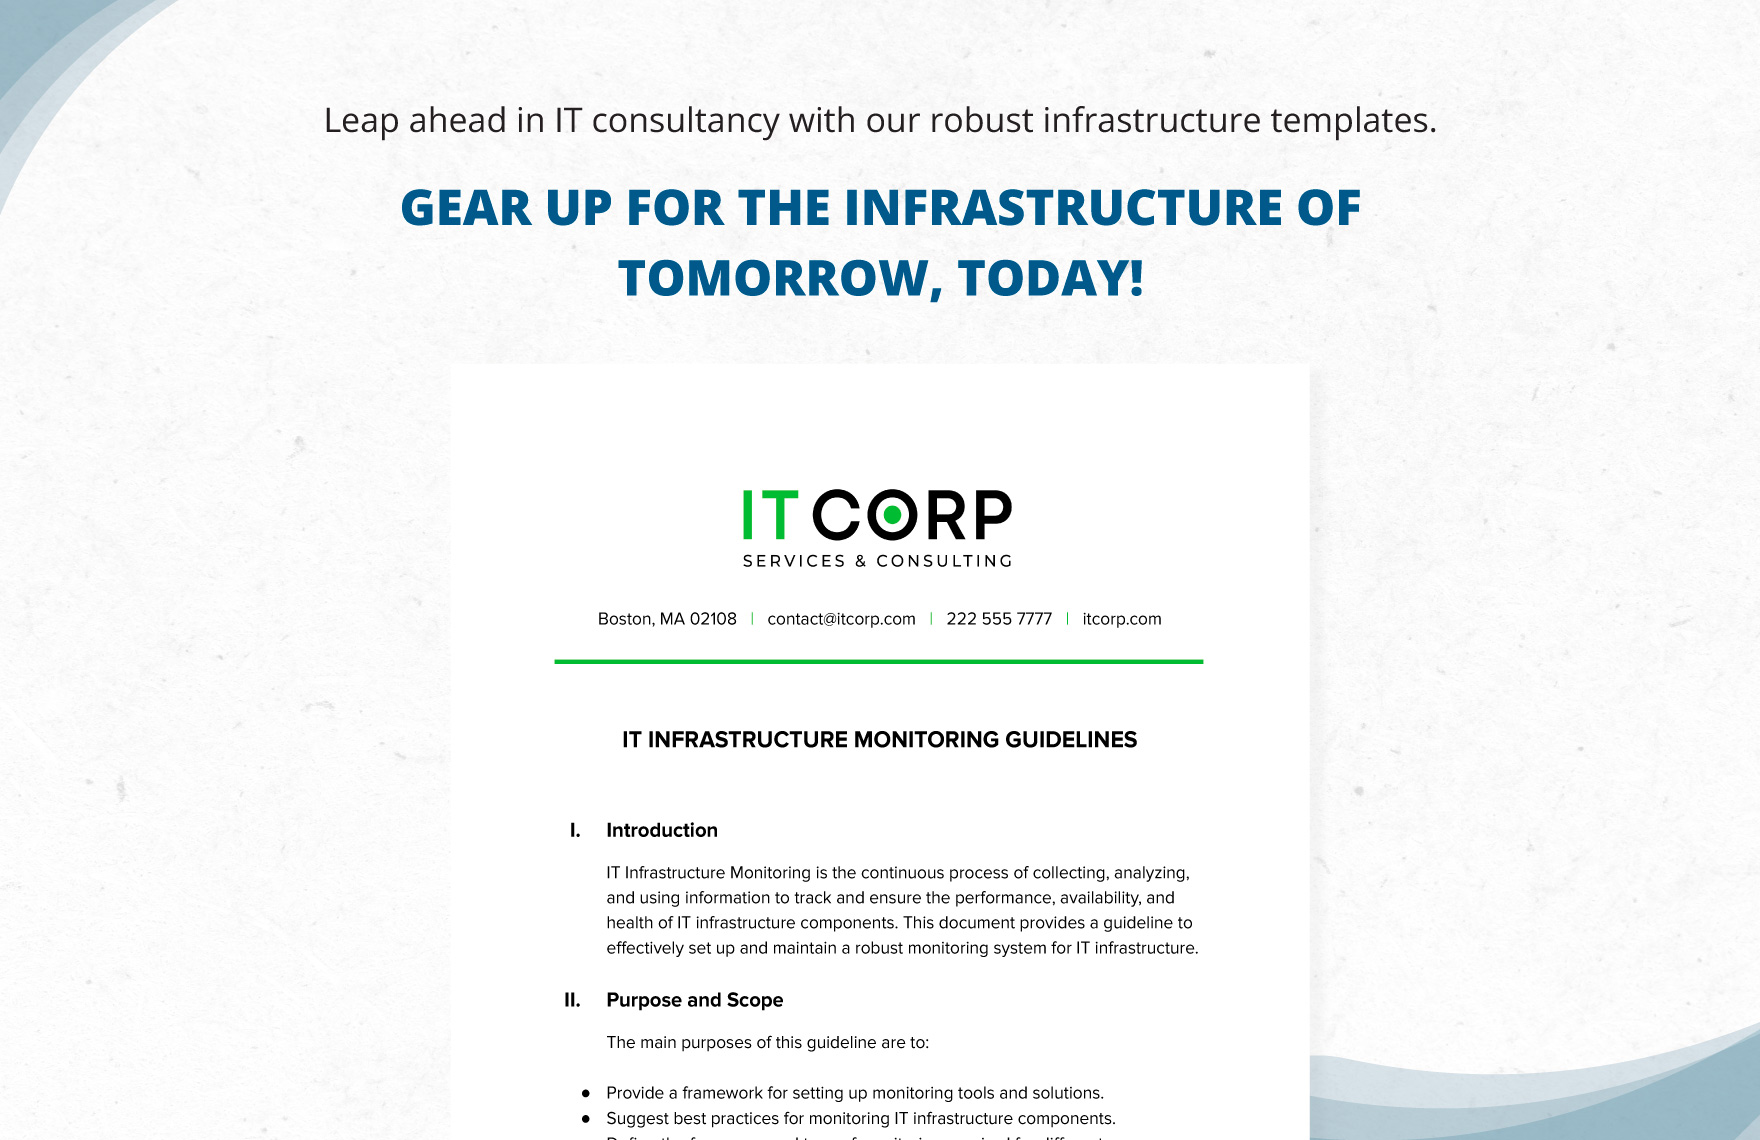 IT Infrastructure Monitoring Guidelines Template